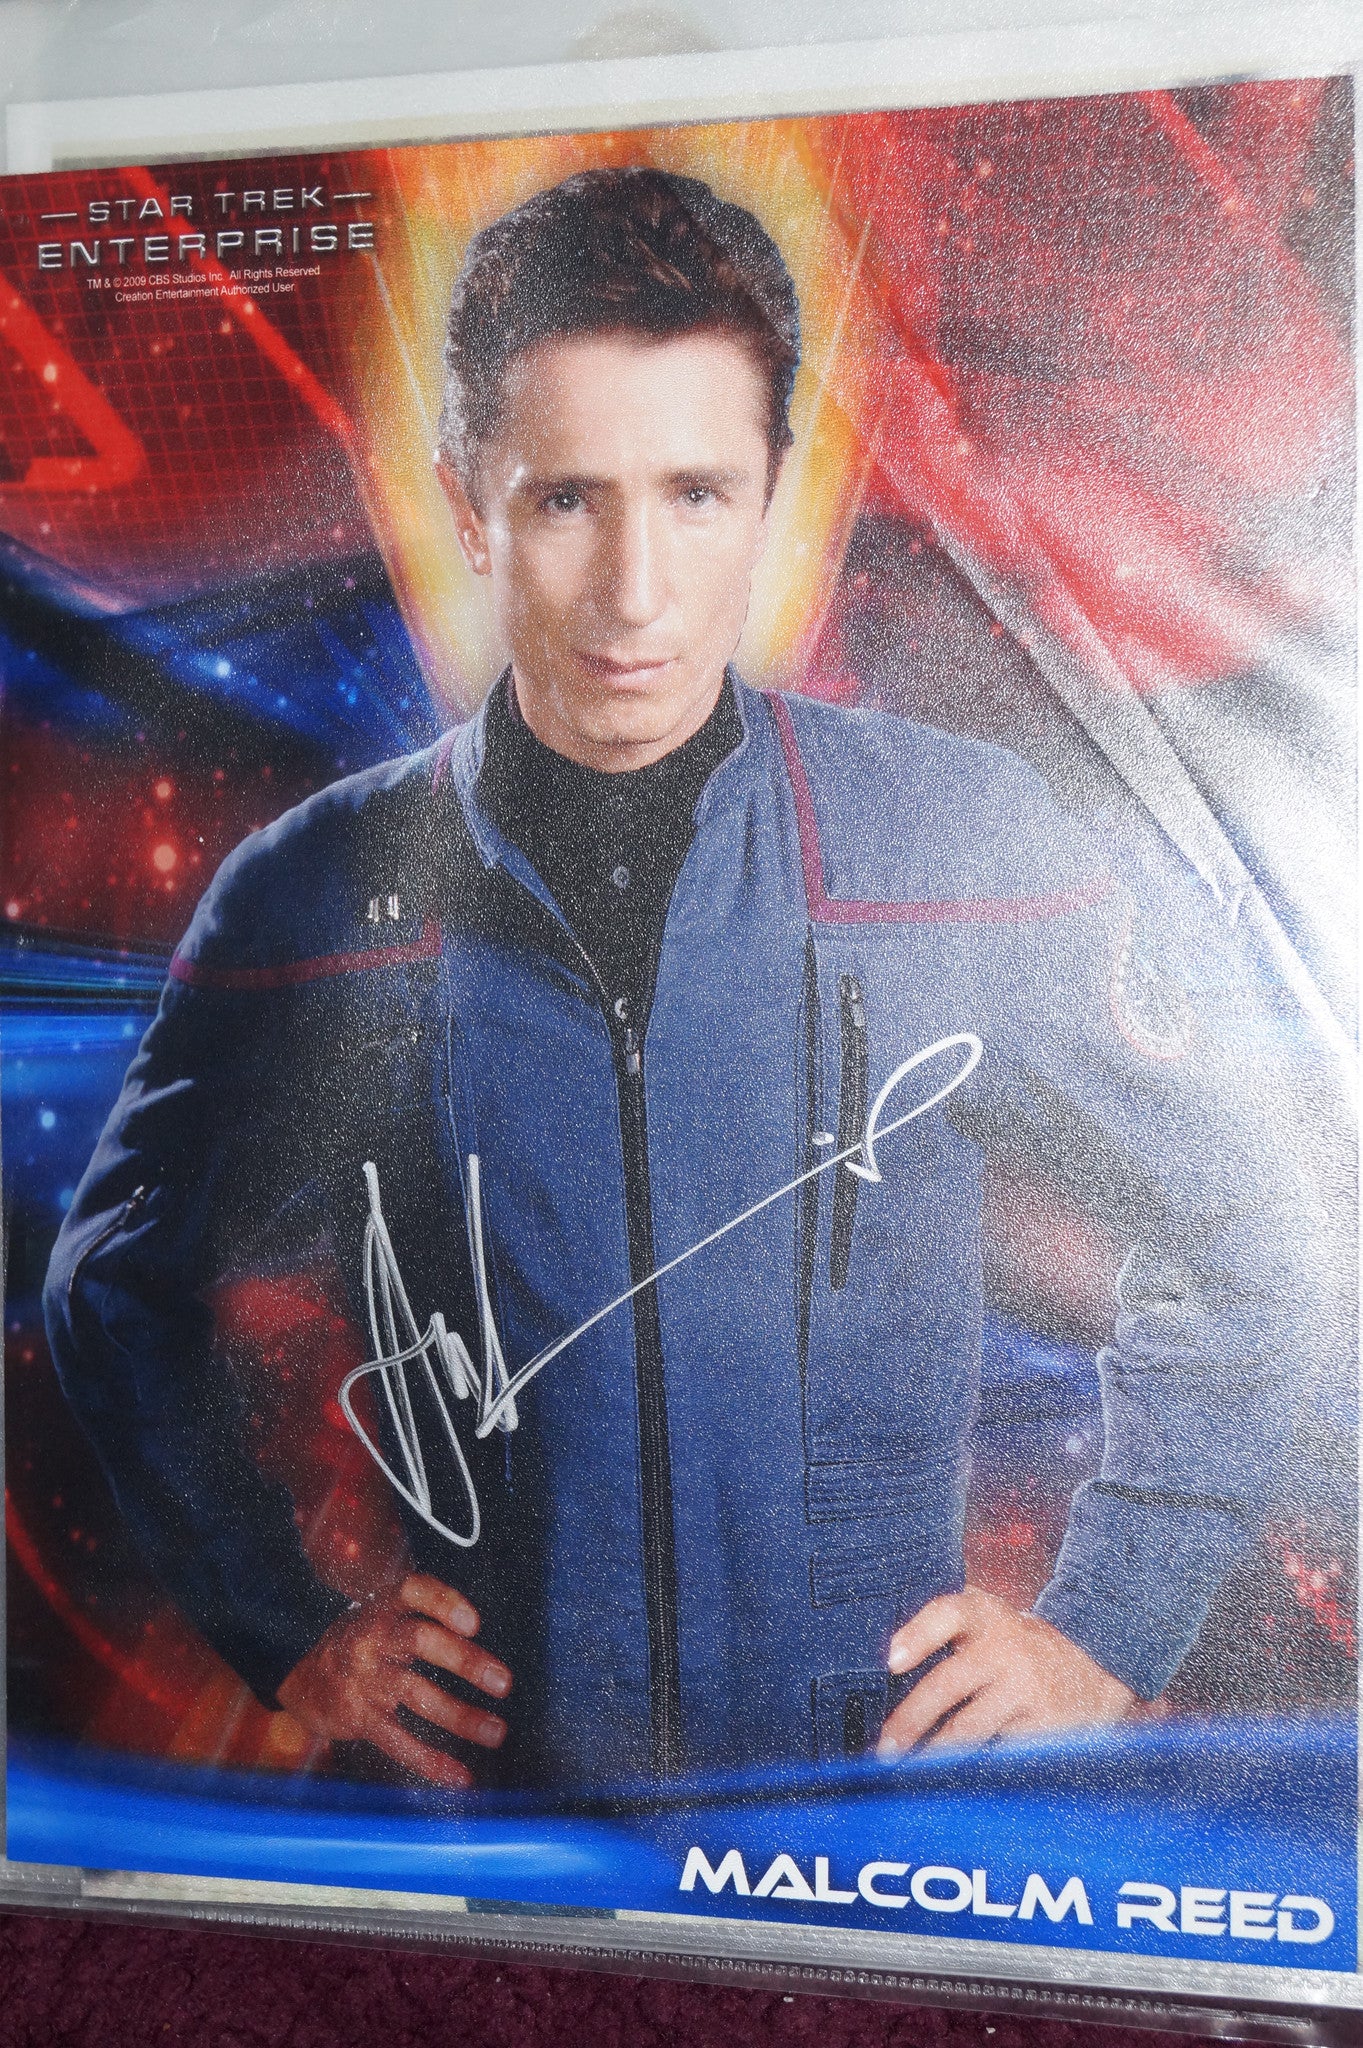 Autographed Photo "Dominic Keating"